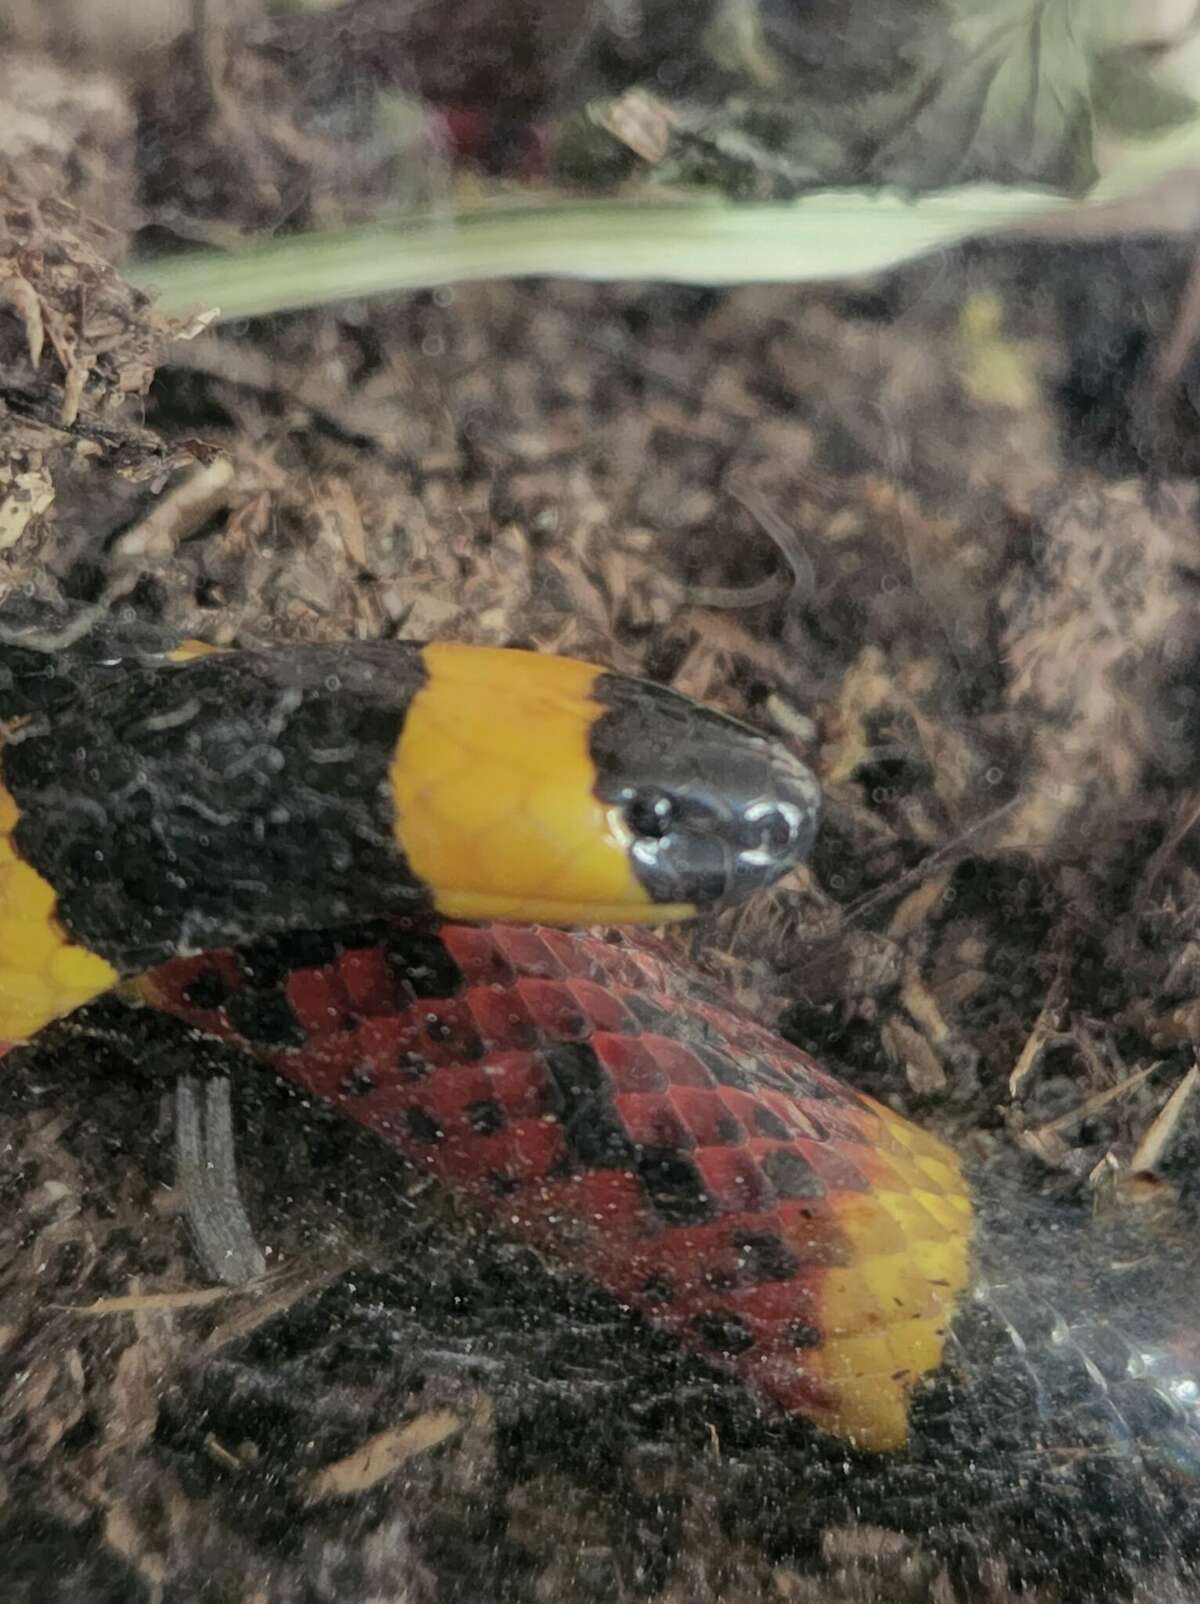 A family found a coral snake in the backyard of their home on the far Northwest Side on Monday.